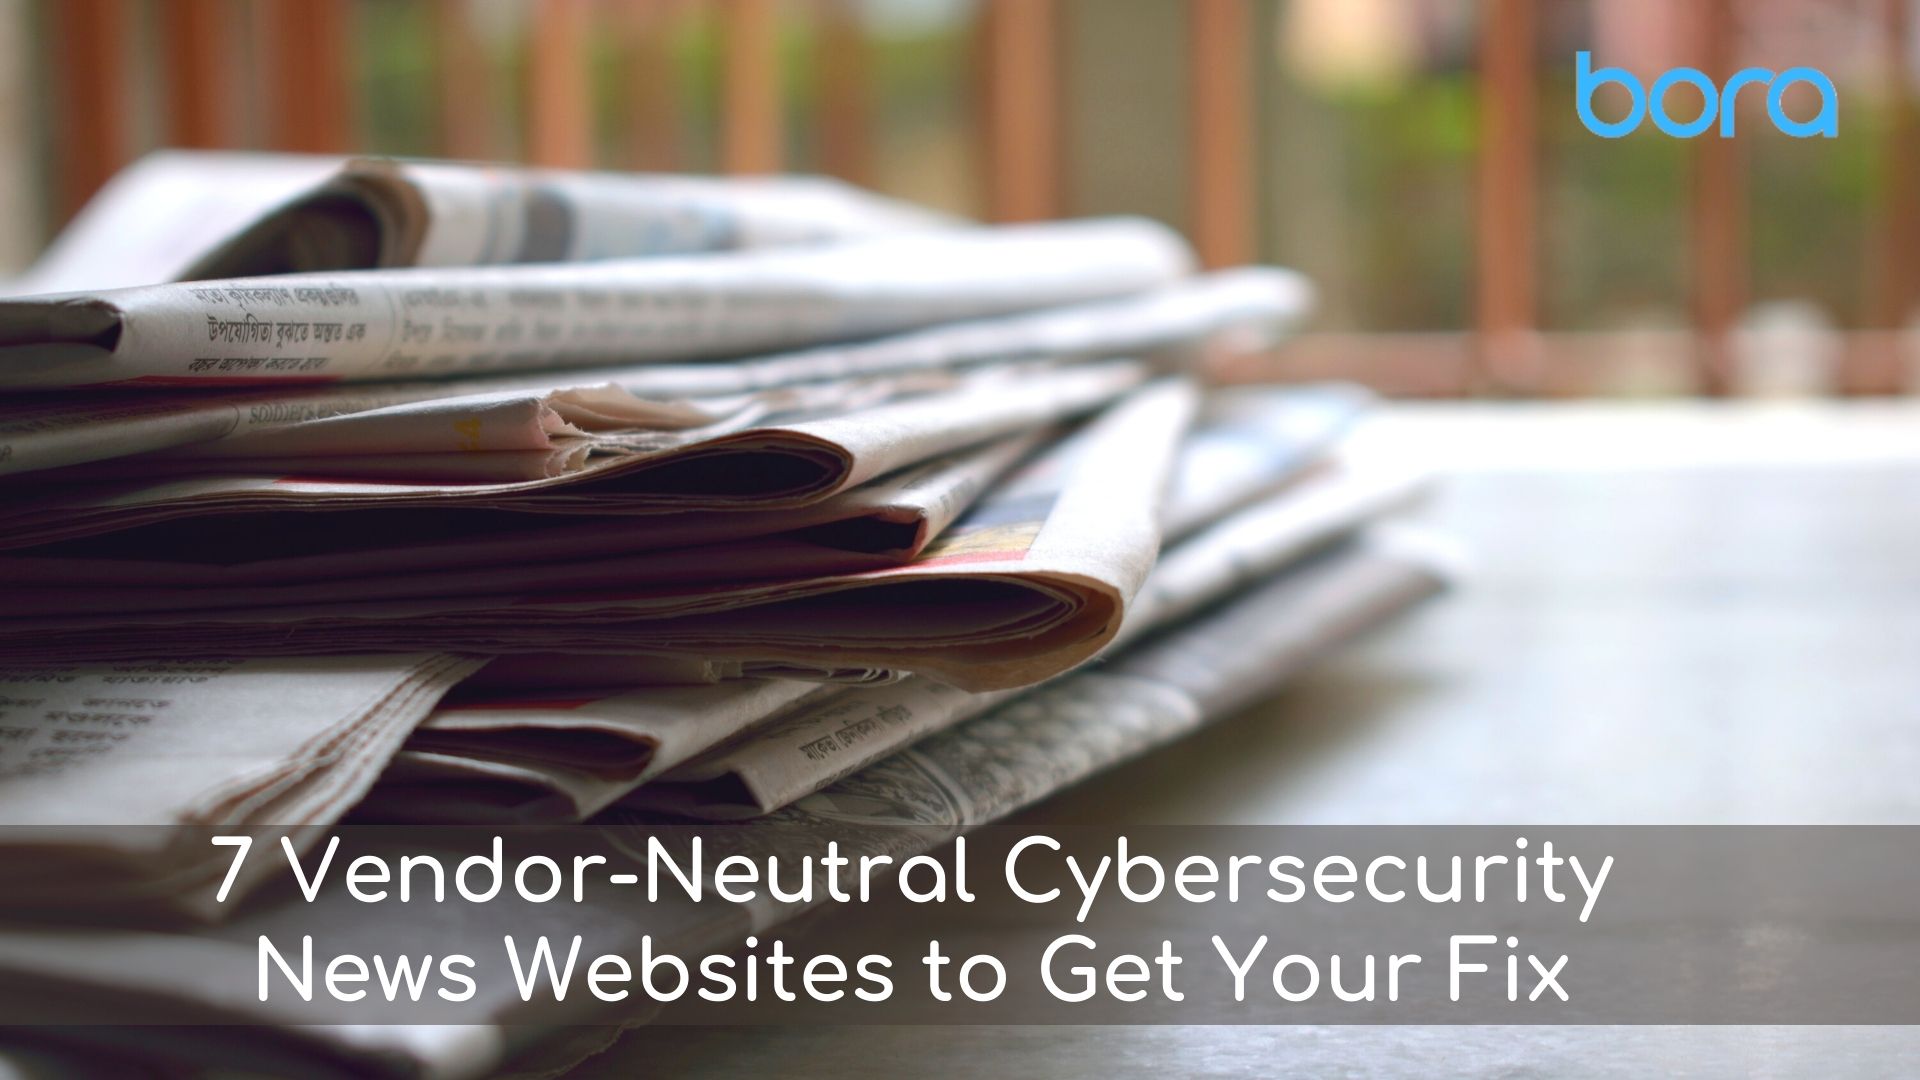 7 Vendor-Neutral Cybersecurity News Websites to Get Your Fix